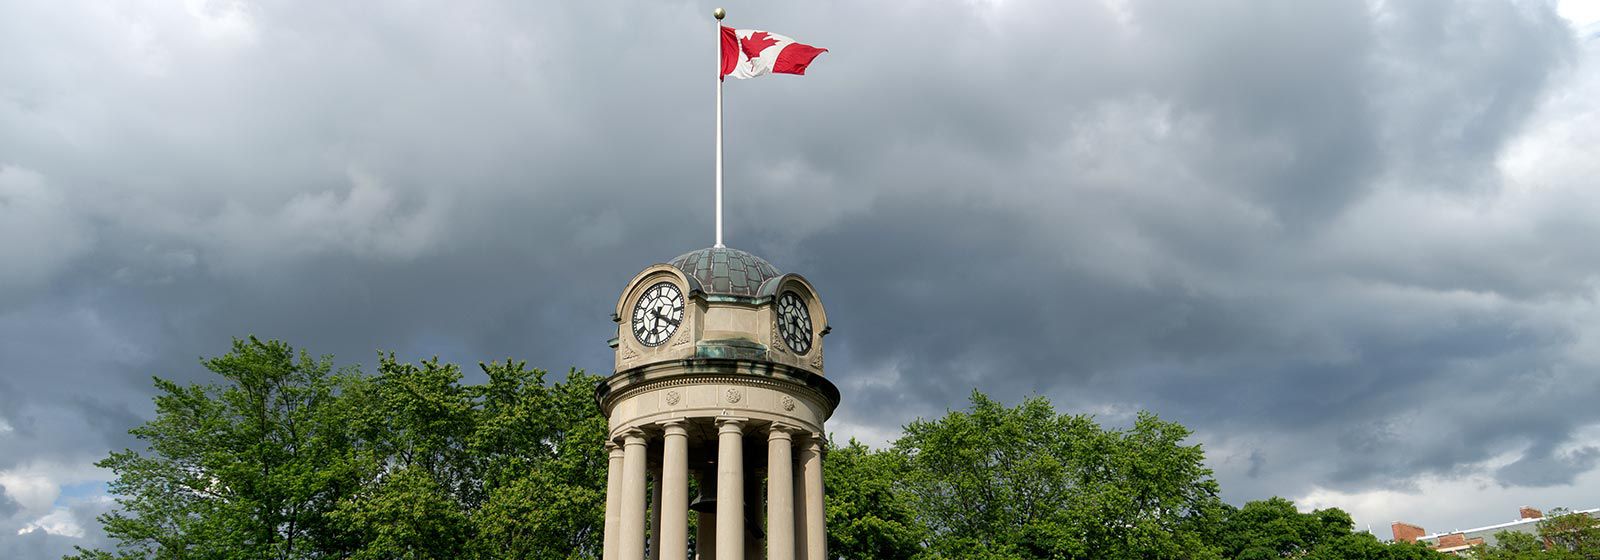 Clock tower, with flag of Canada raised above it, in London, Canada